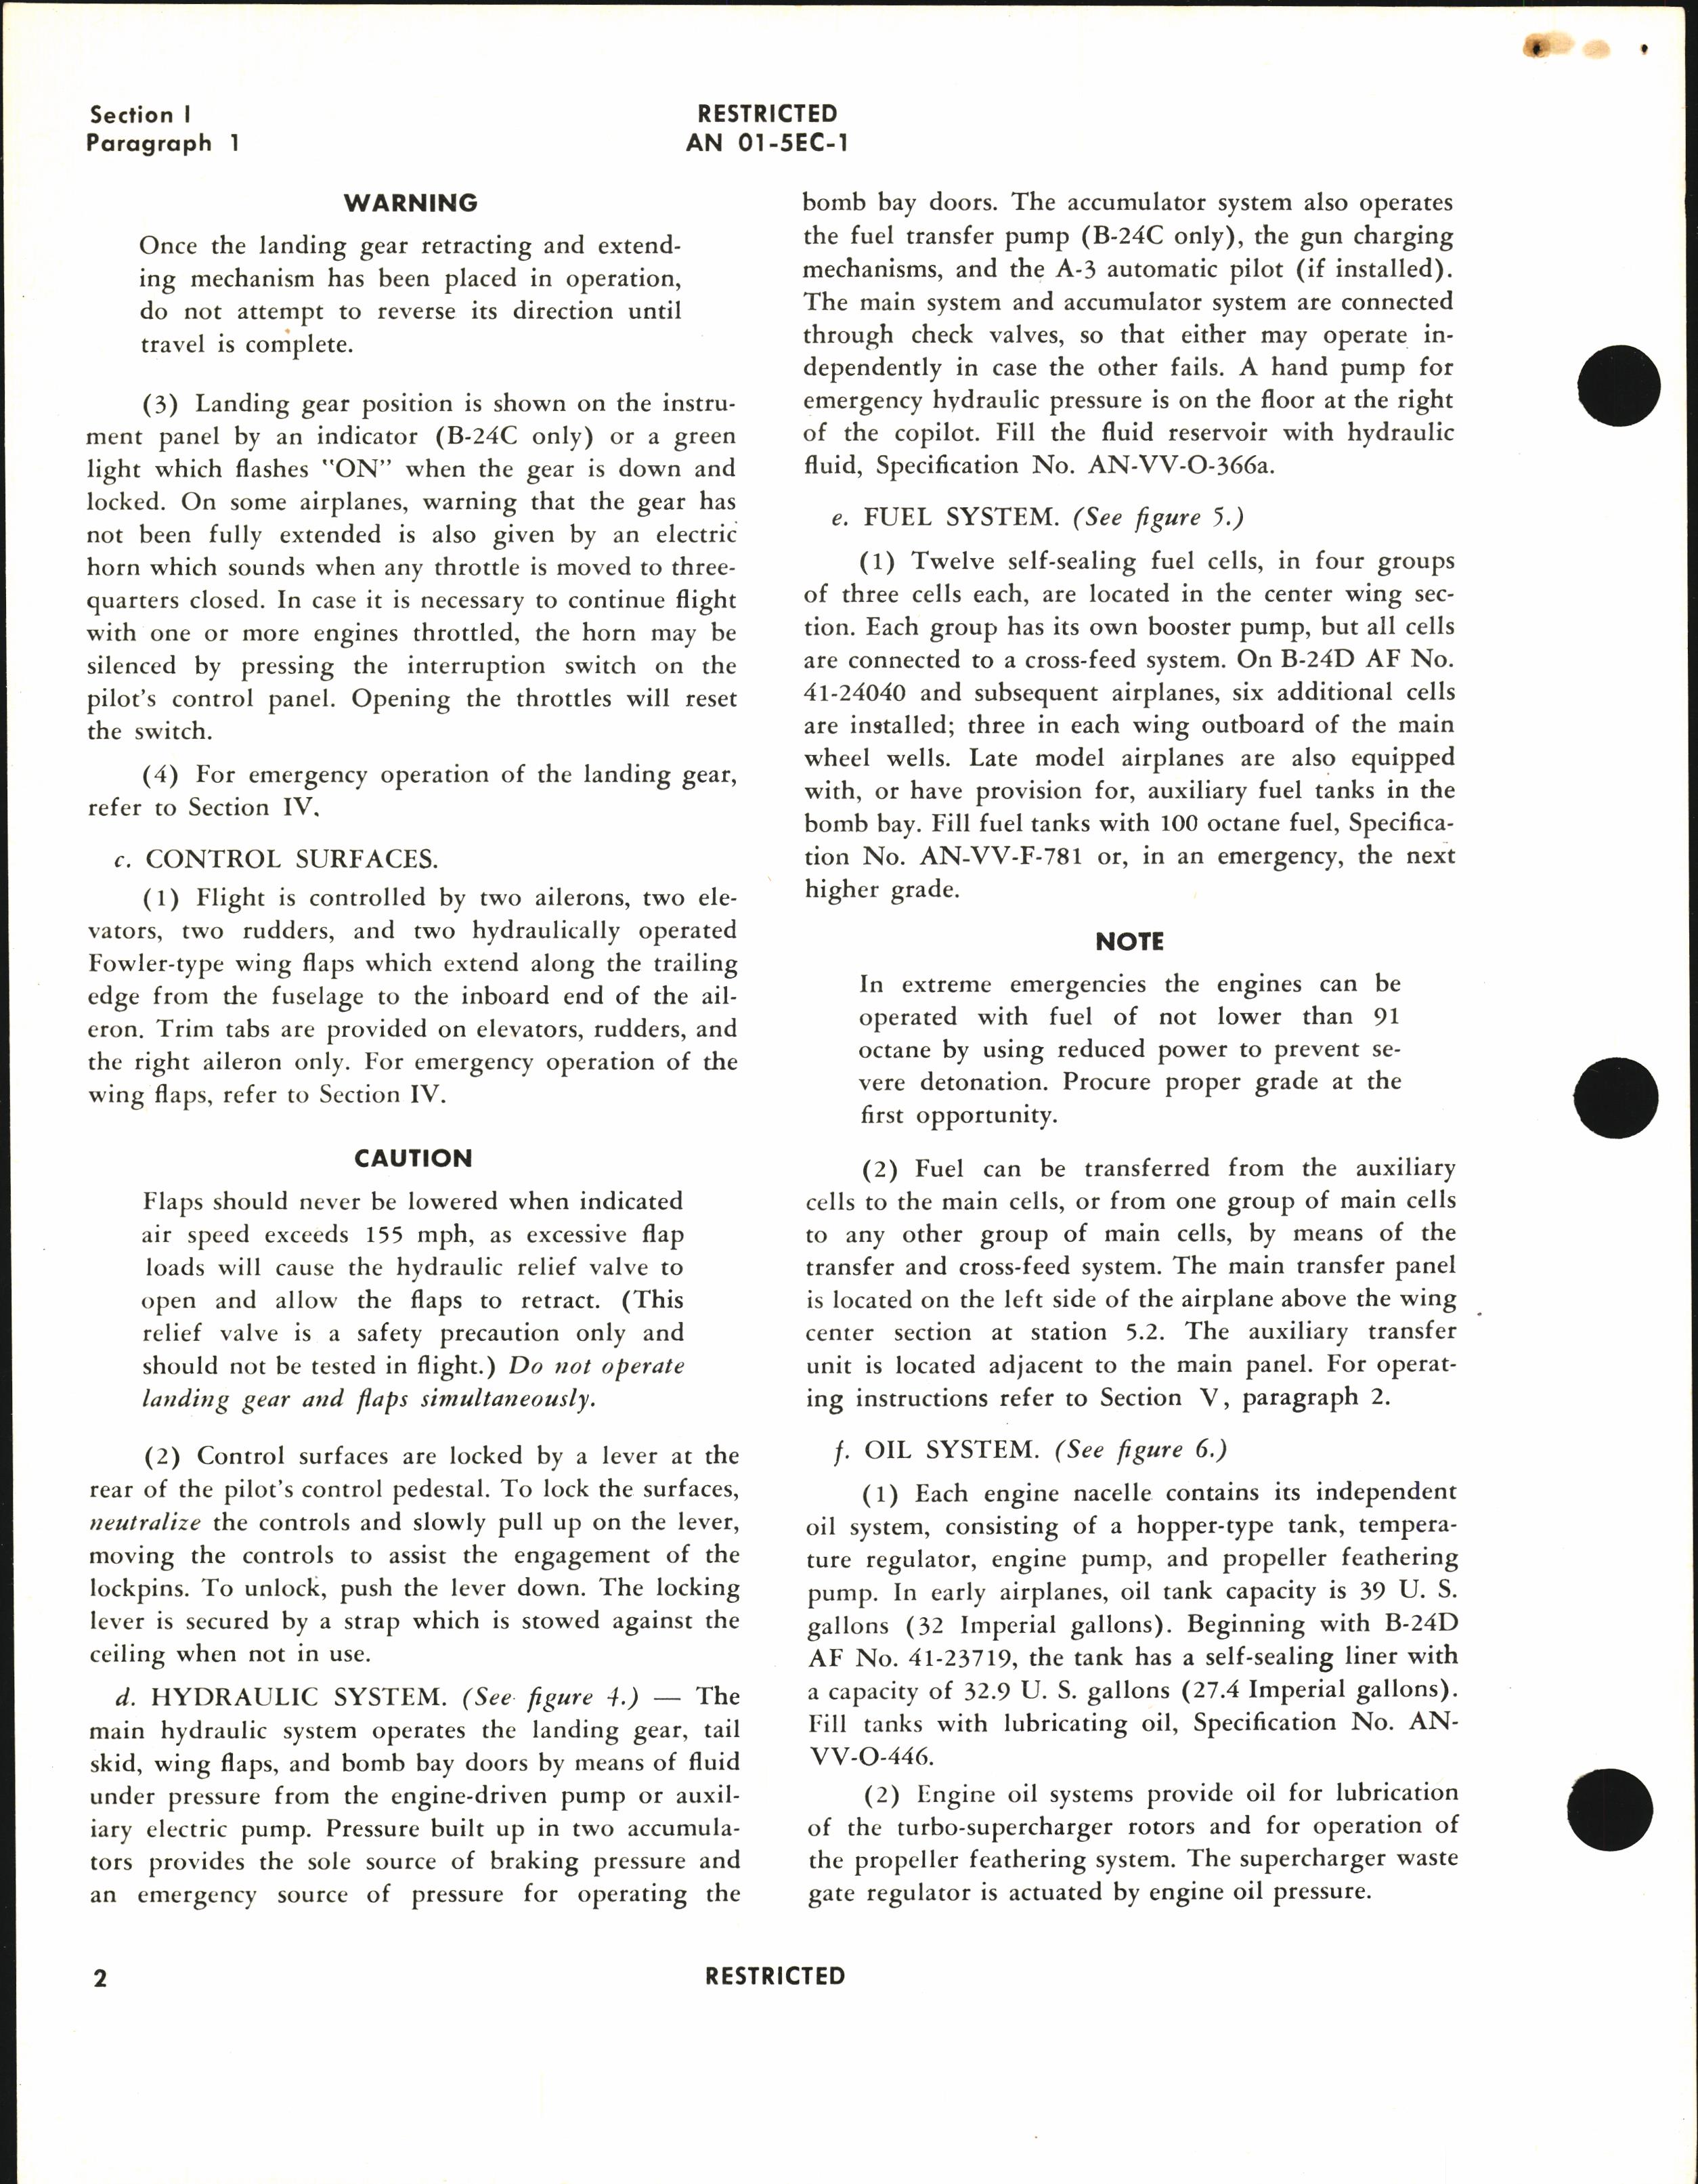 Sample page 6 from AirCorps Library document: Pilot's Flight Operating Instructions for B-24D, E, and RB-24C